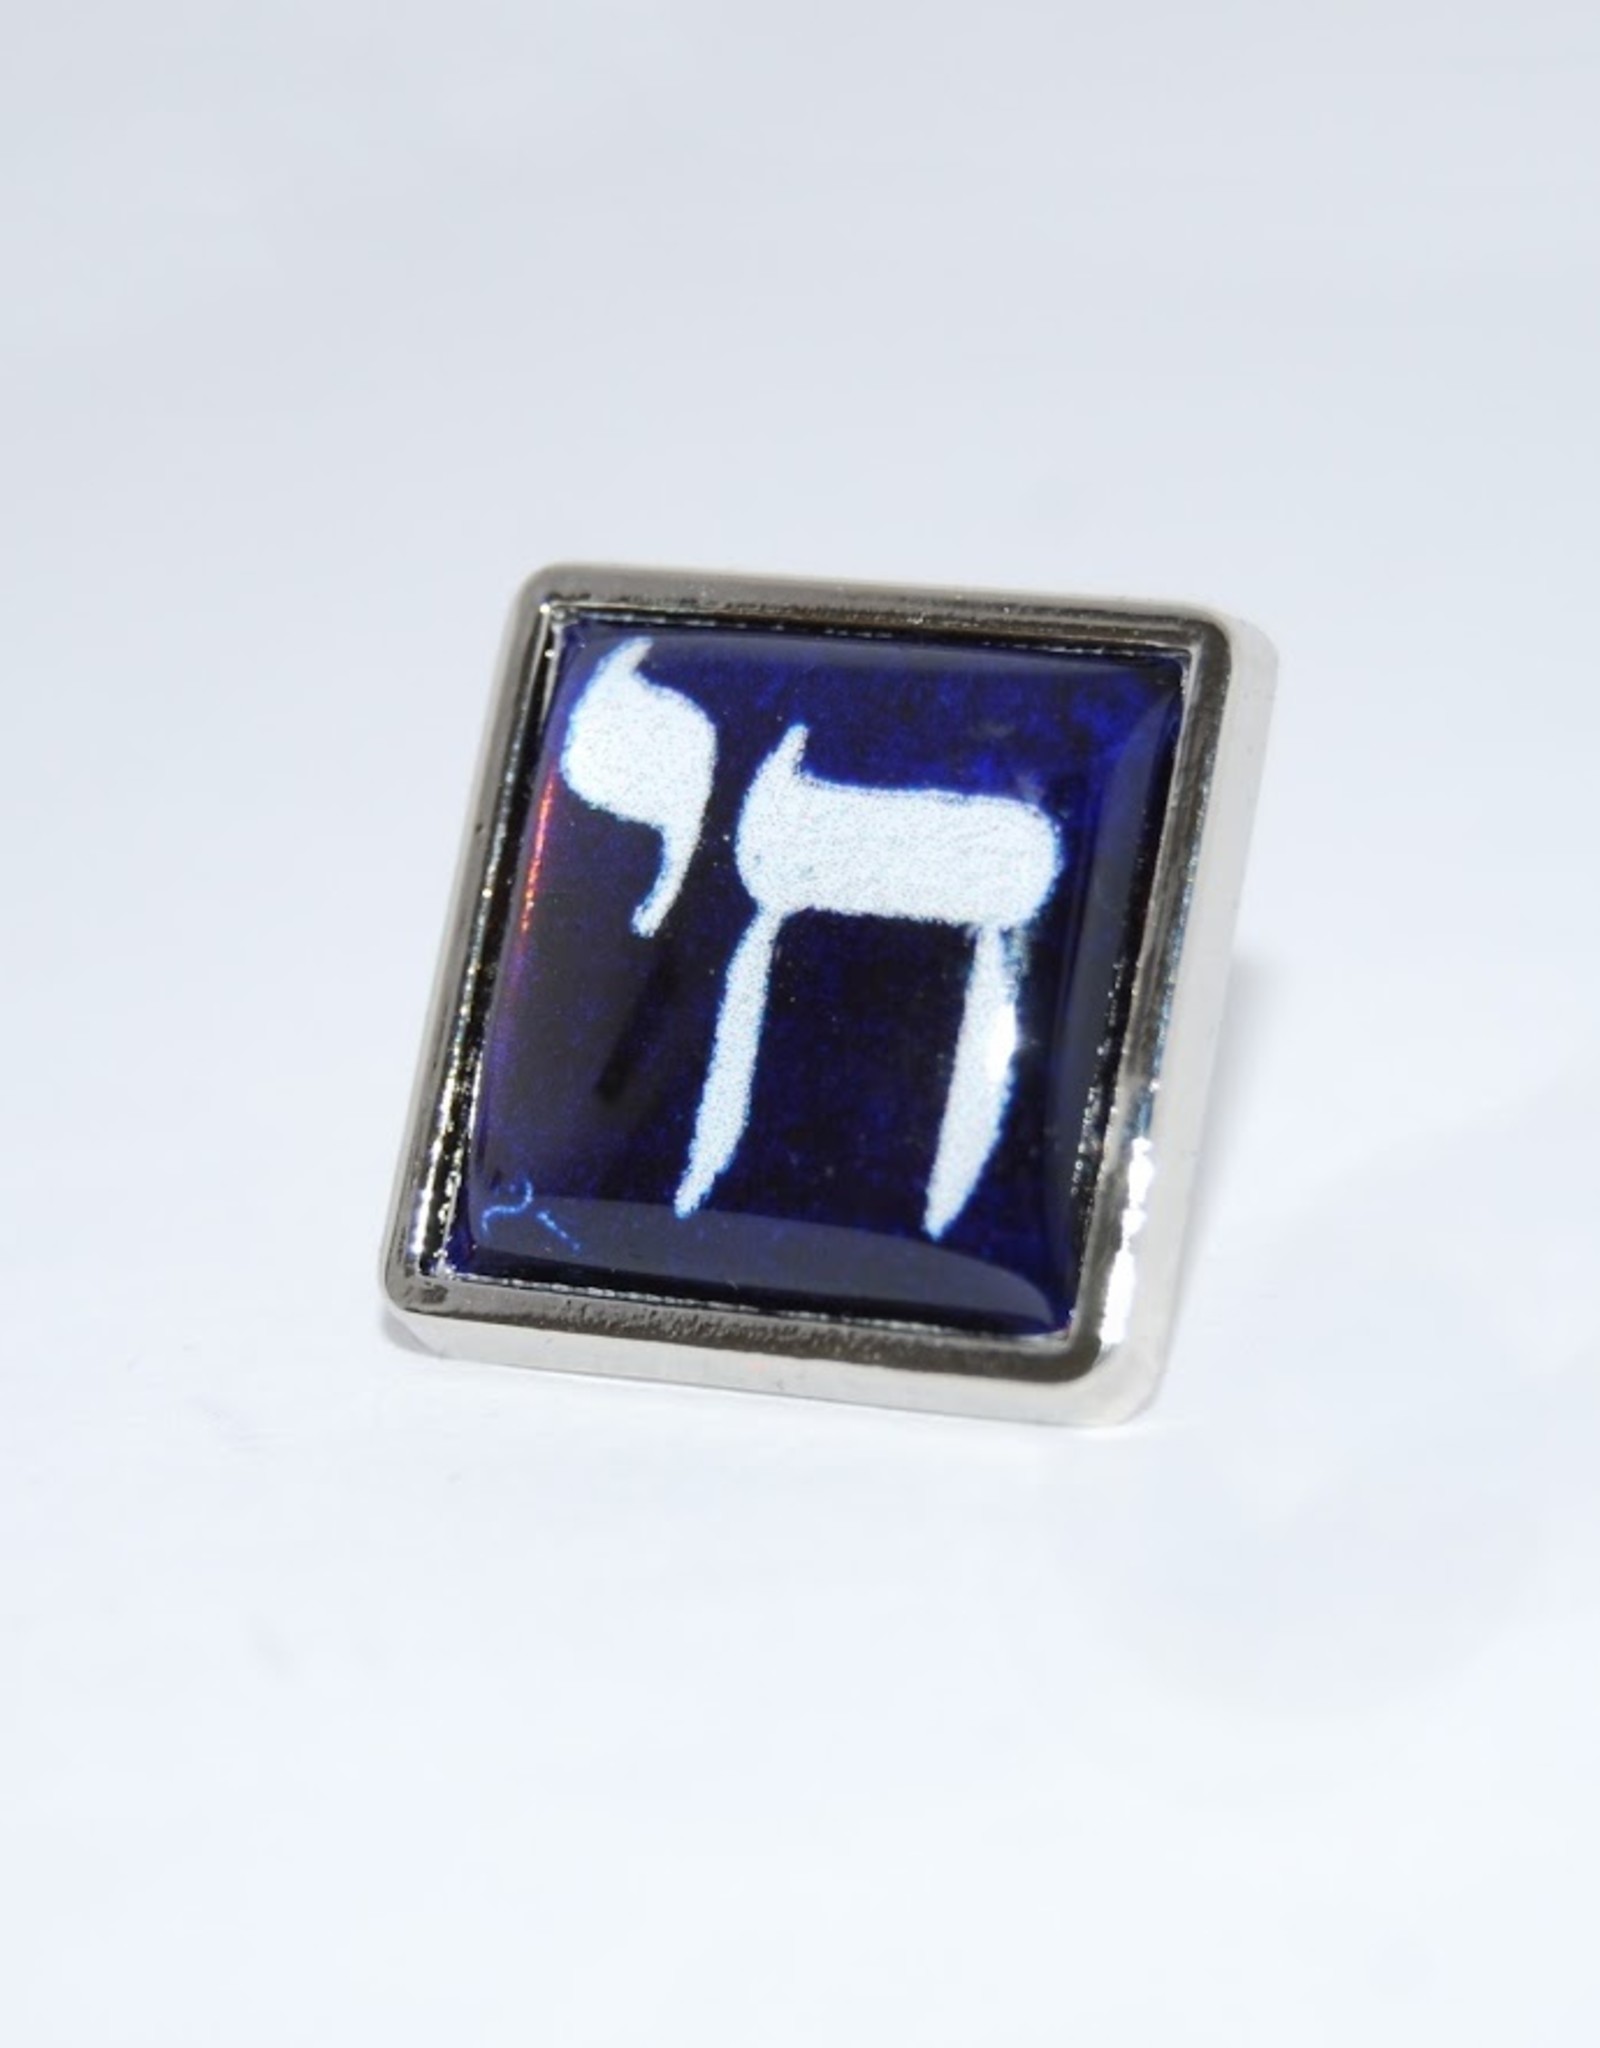 Chaipainter Chai Pin brooch  in Israeli blue and white colors.